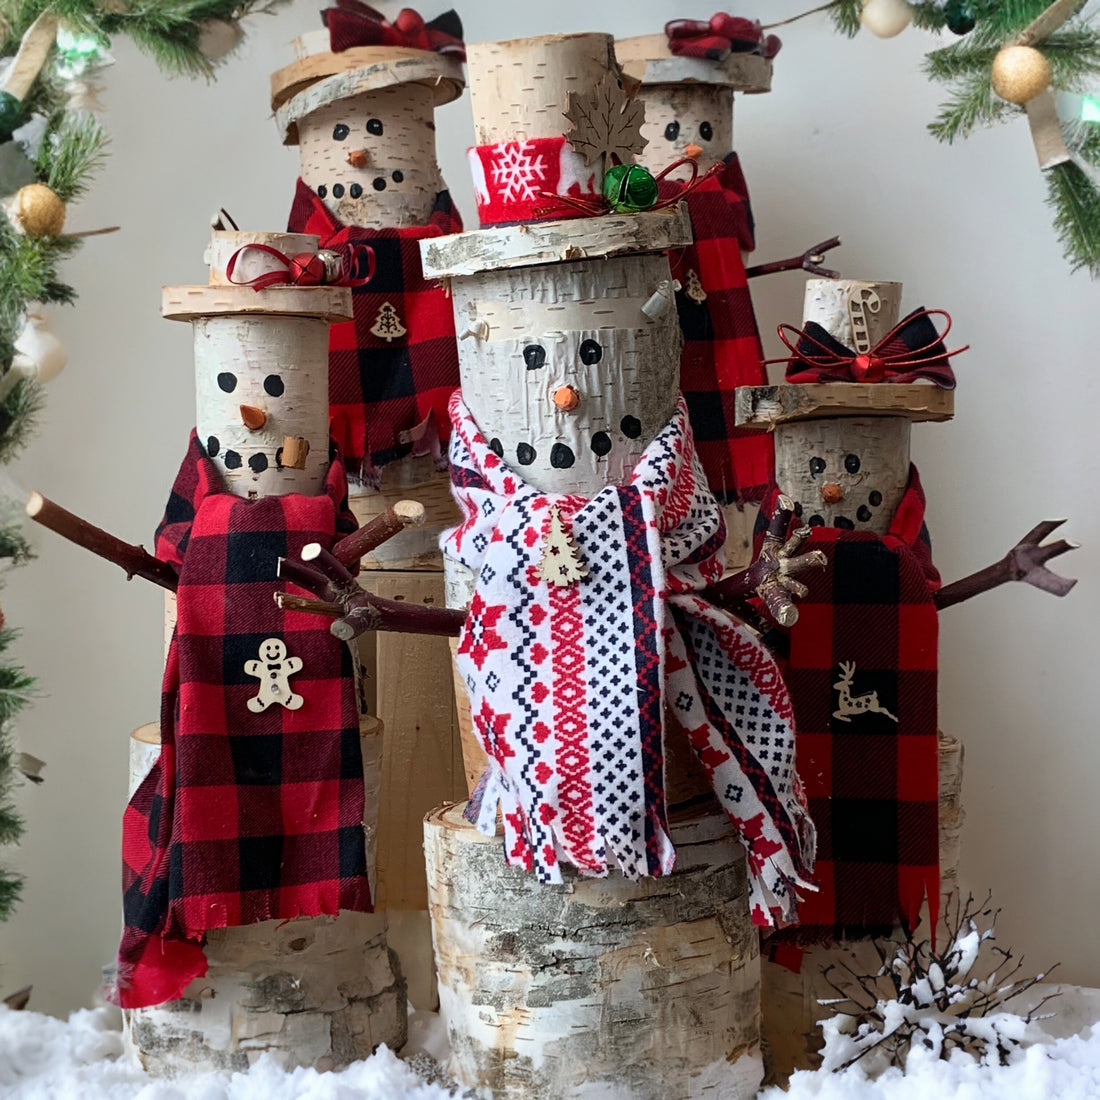 Rustic Holiday Snowman - Handcrafted Wooden Holiday Decor